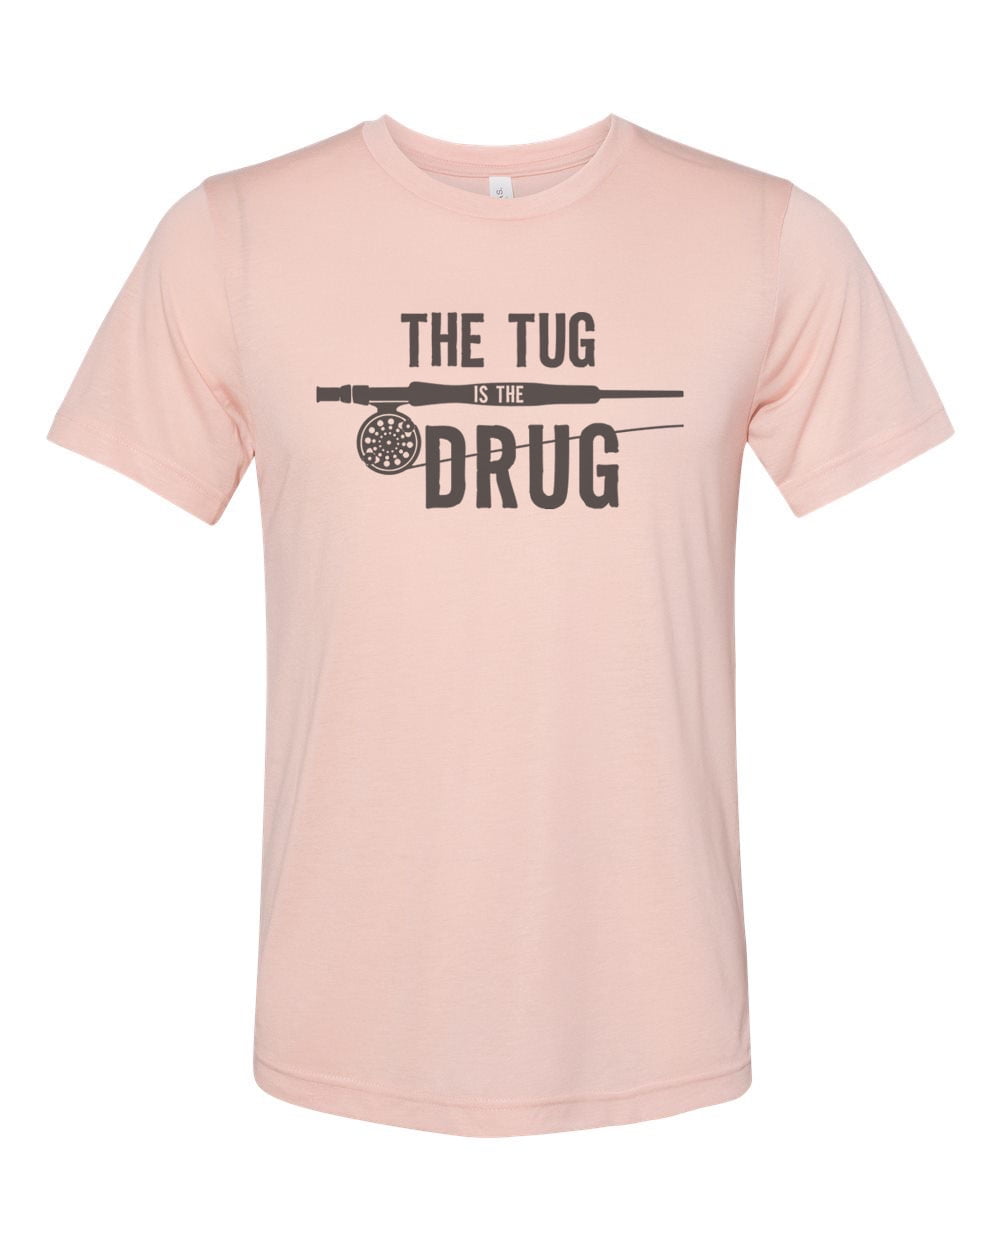 Fishing Shirt, The Tug Is The Drug, Fly Fishing Apparel, Trout